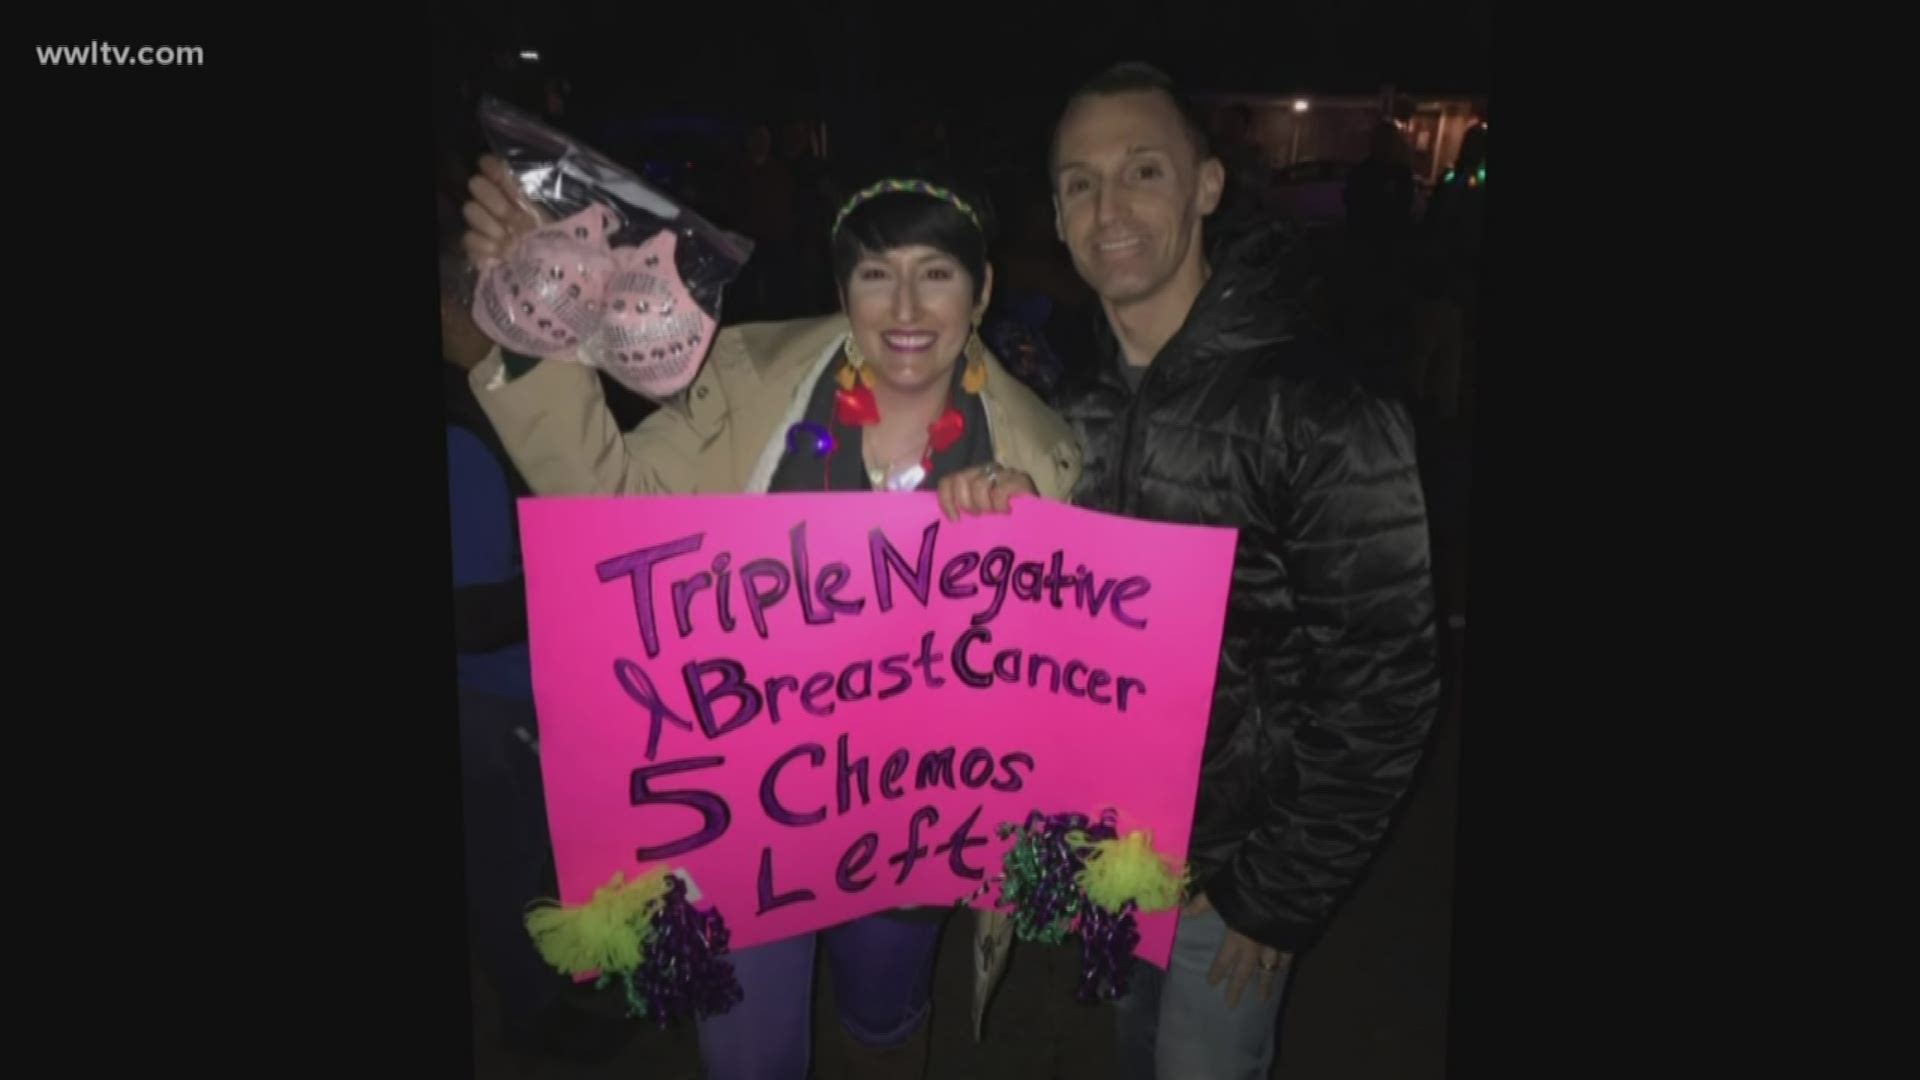 More than a throw: Krewe of Isis bras inspire breast cancer patient